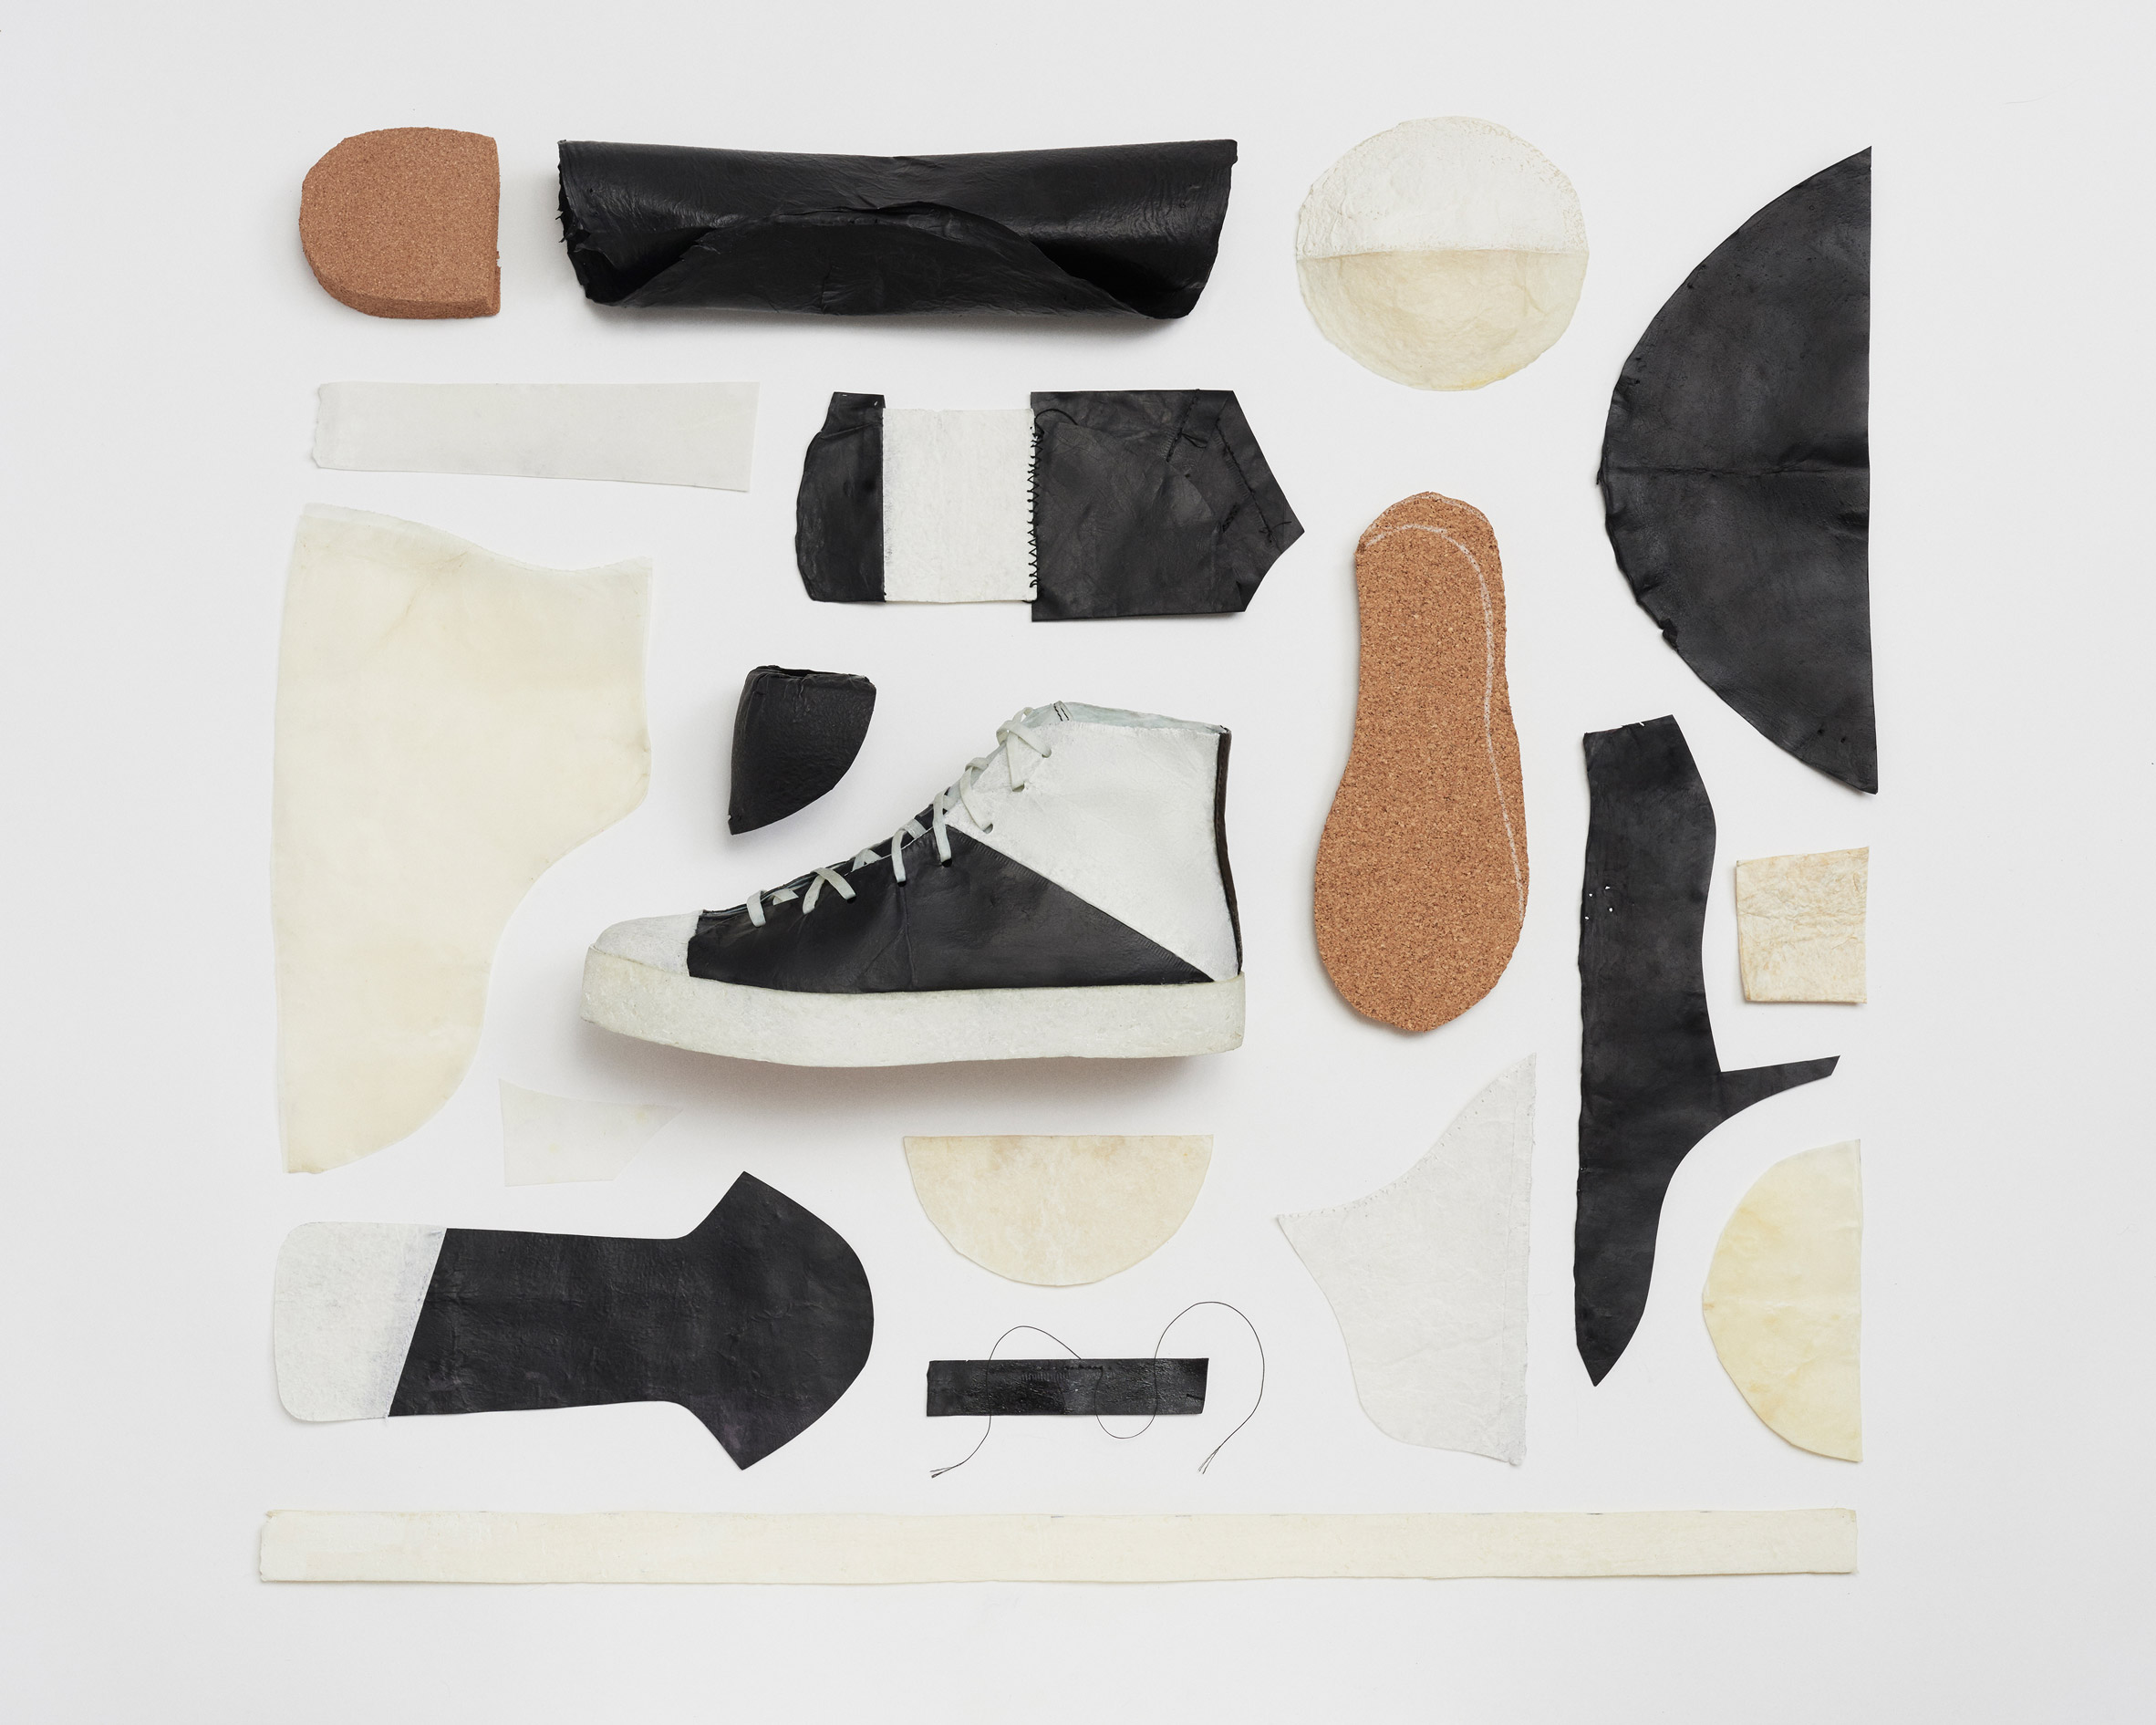 Anatomy of the bio-leather trainers by Public School and Theanne Schiros